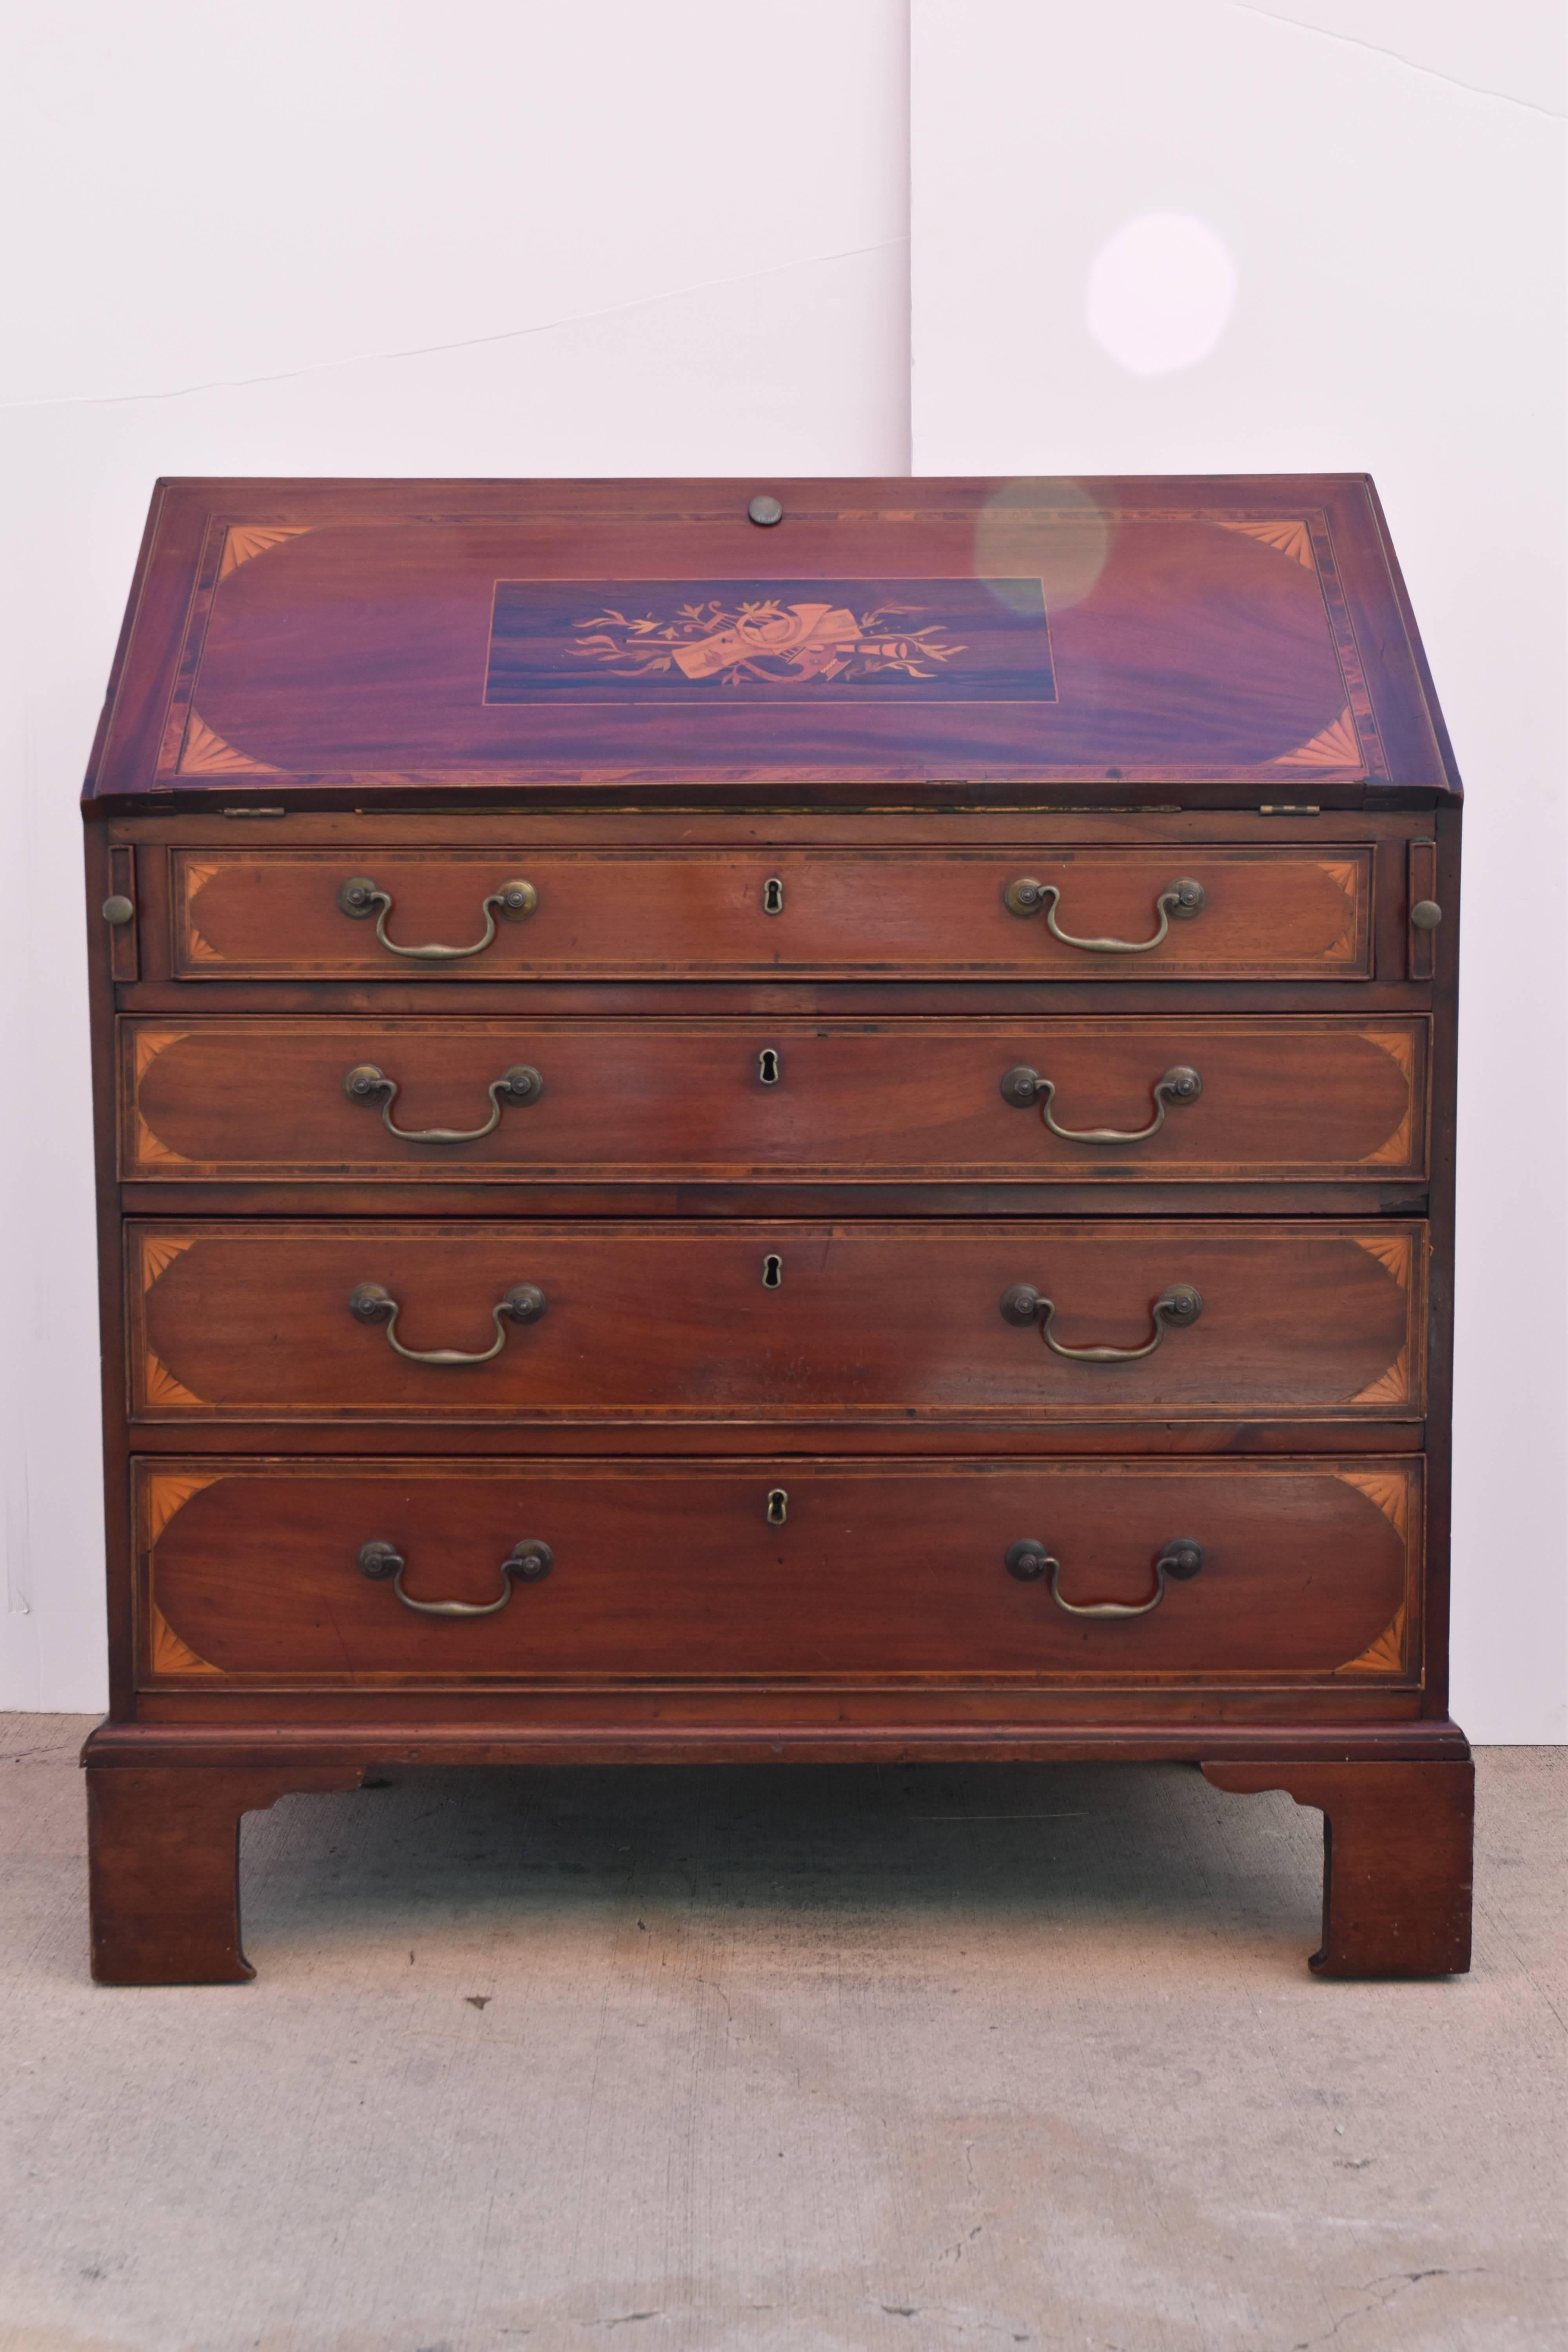 A beautifully detailed drop front secretary with a drop front and leather top writing surface.

Depth is 35.5